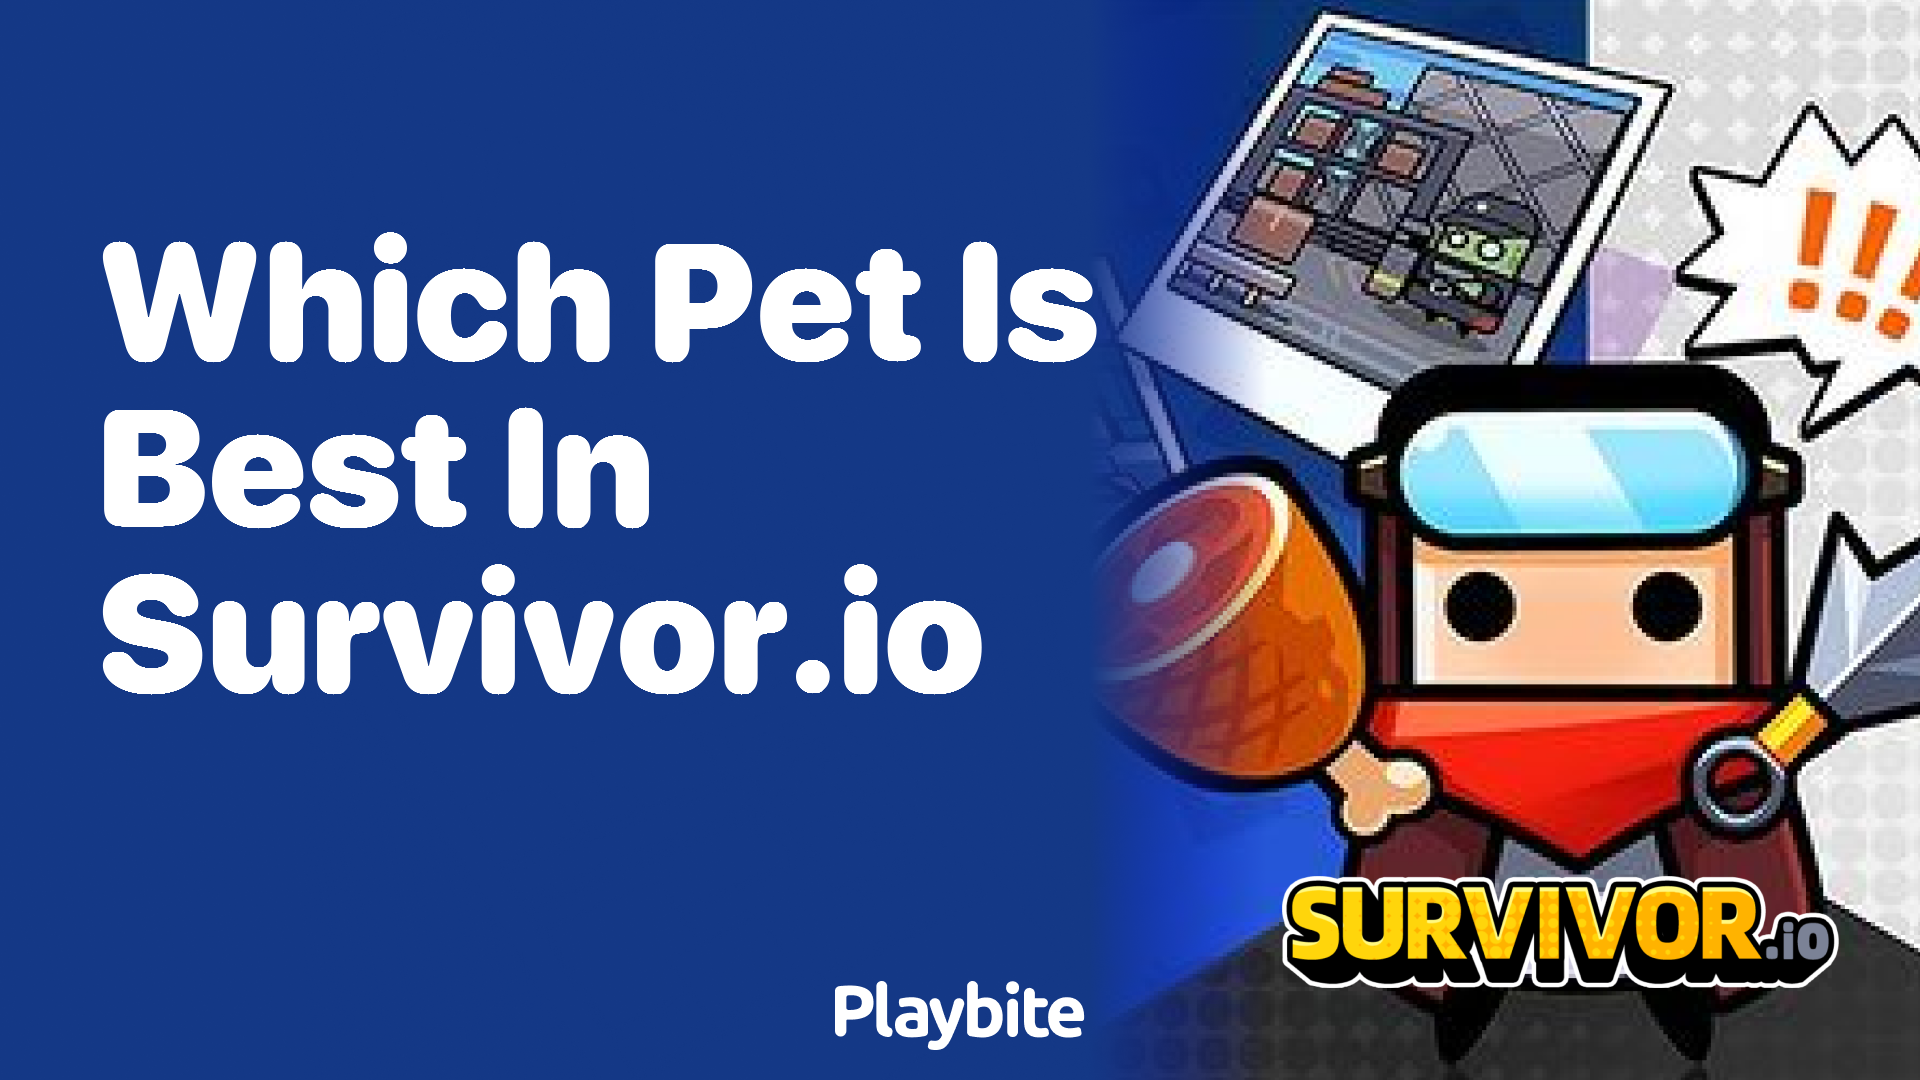 Which Pet is Best in Survivor.io? Find Out Here!